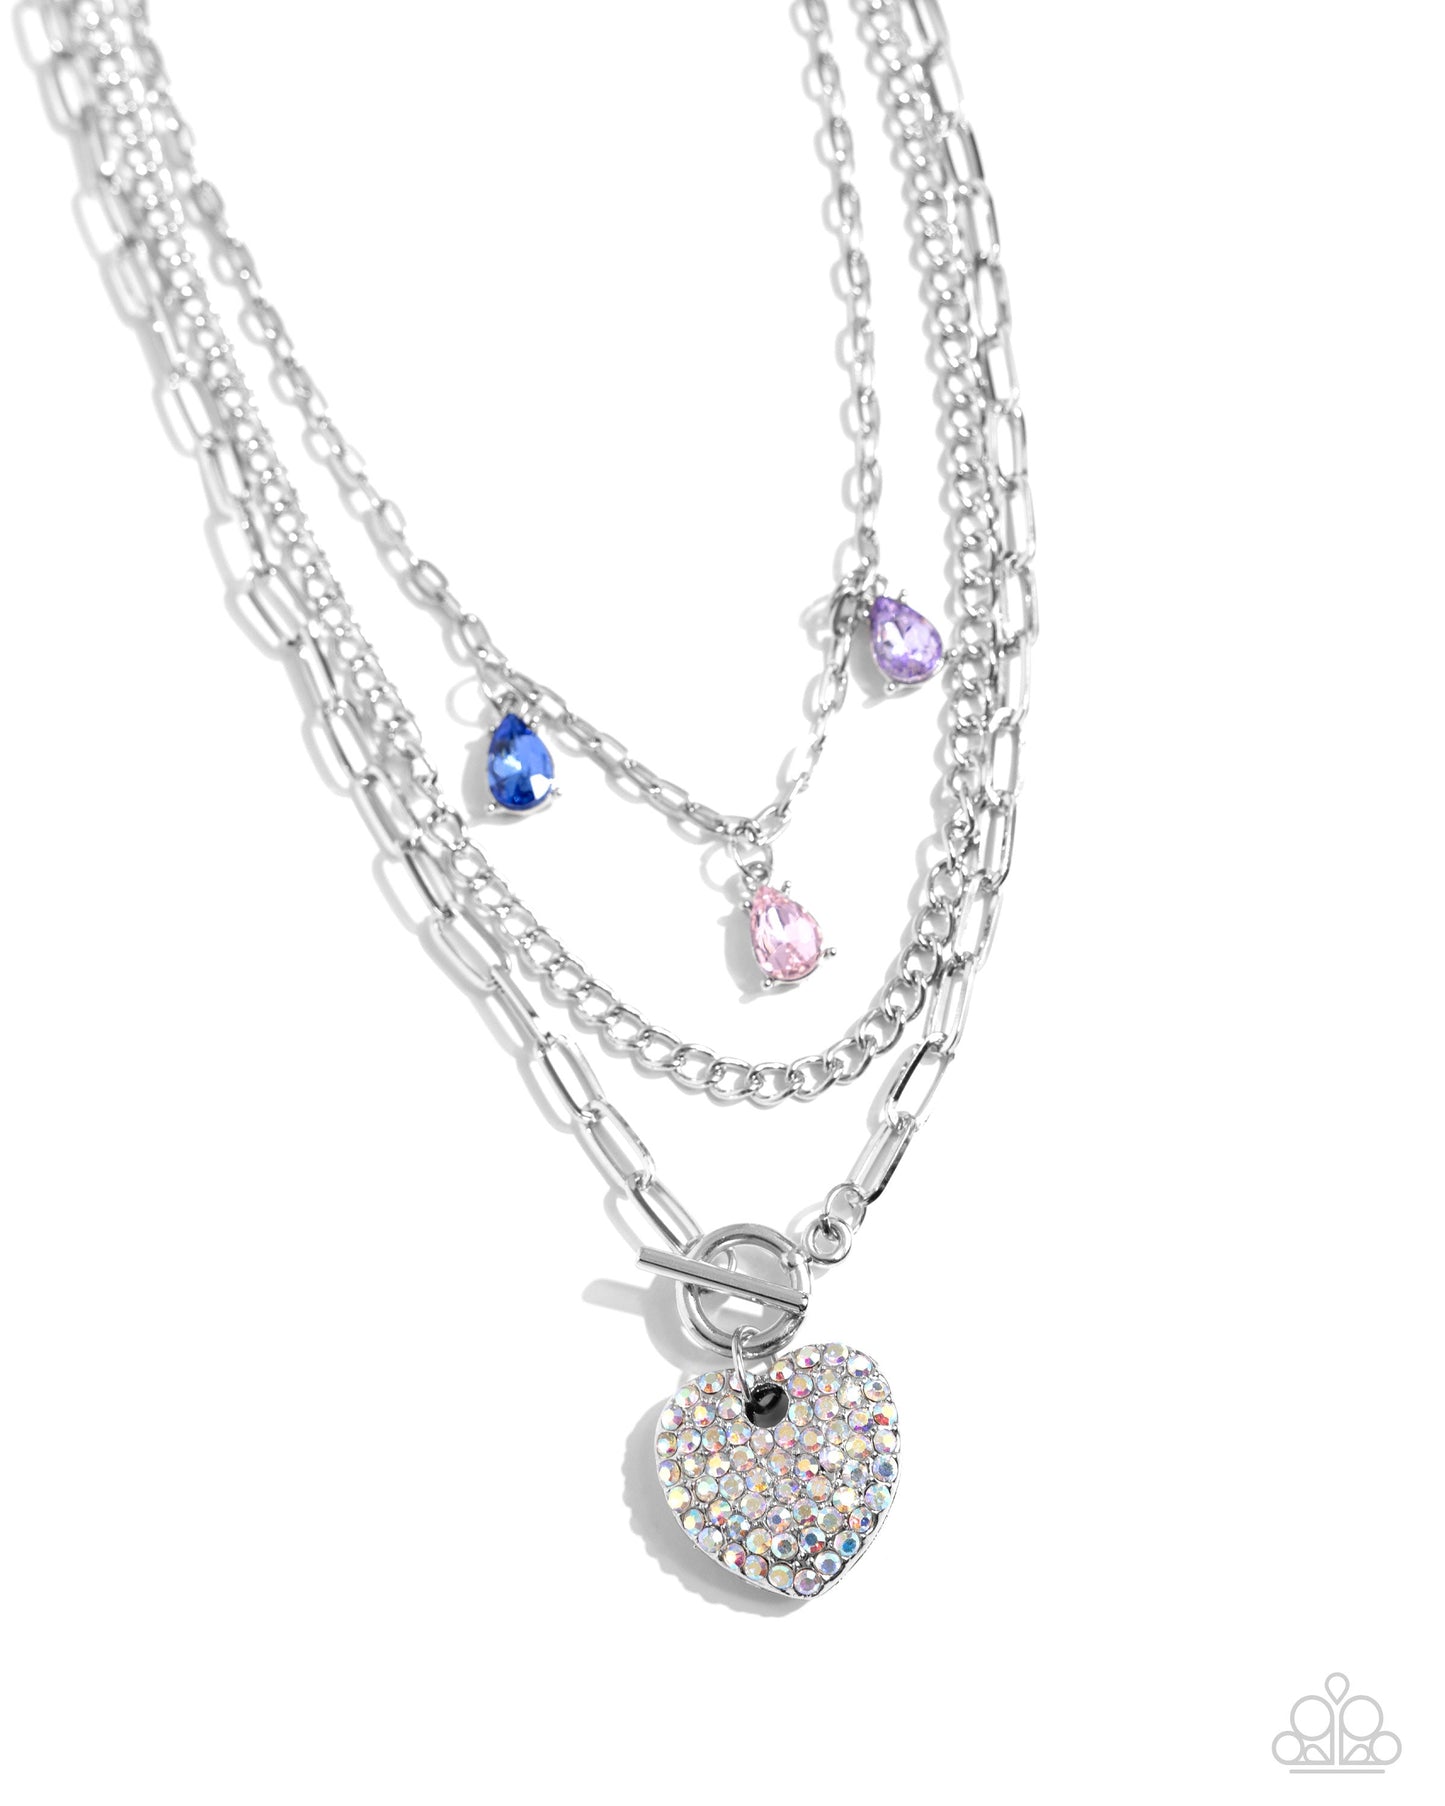 HEART History - Multi Color Iridescent Necklace - Paparazzi Accessories - Three mismatched silver chains layer and loop around the neckline. A purple, light pink, and blue teardrop gem in silver-pronged fittings dangle from the uppermost chain while an iridescent-rhinestone encrusted heart pendant loops through the lowermost chain for a radiantly, romantic statement. Features an adjustable clasp closure.